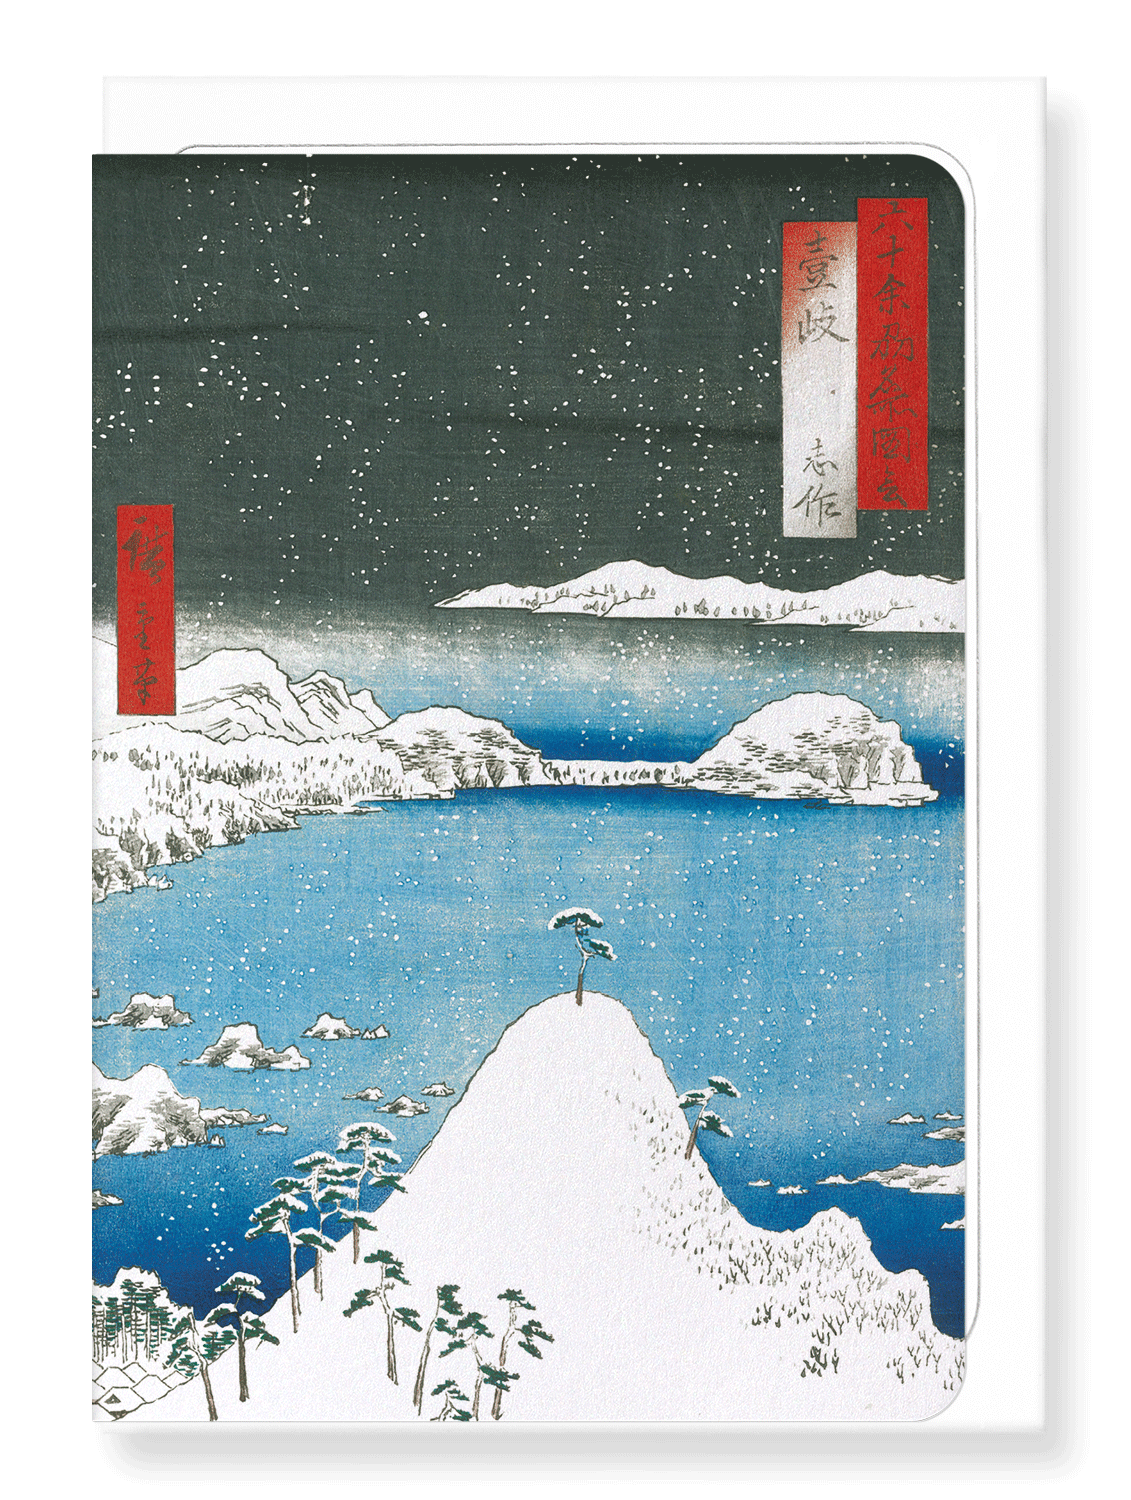 Ezen Designs - Snow at iki province - Greeting Card - Front